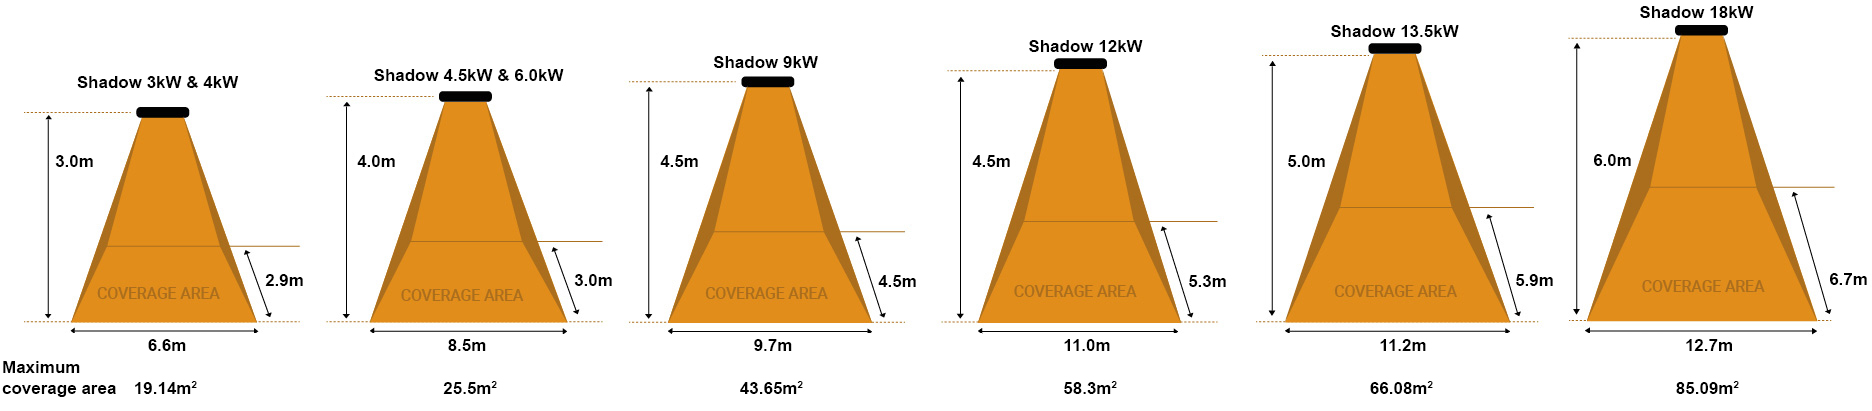 Shadow Warehouse Infrared heater Coverage